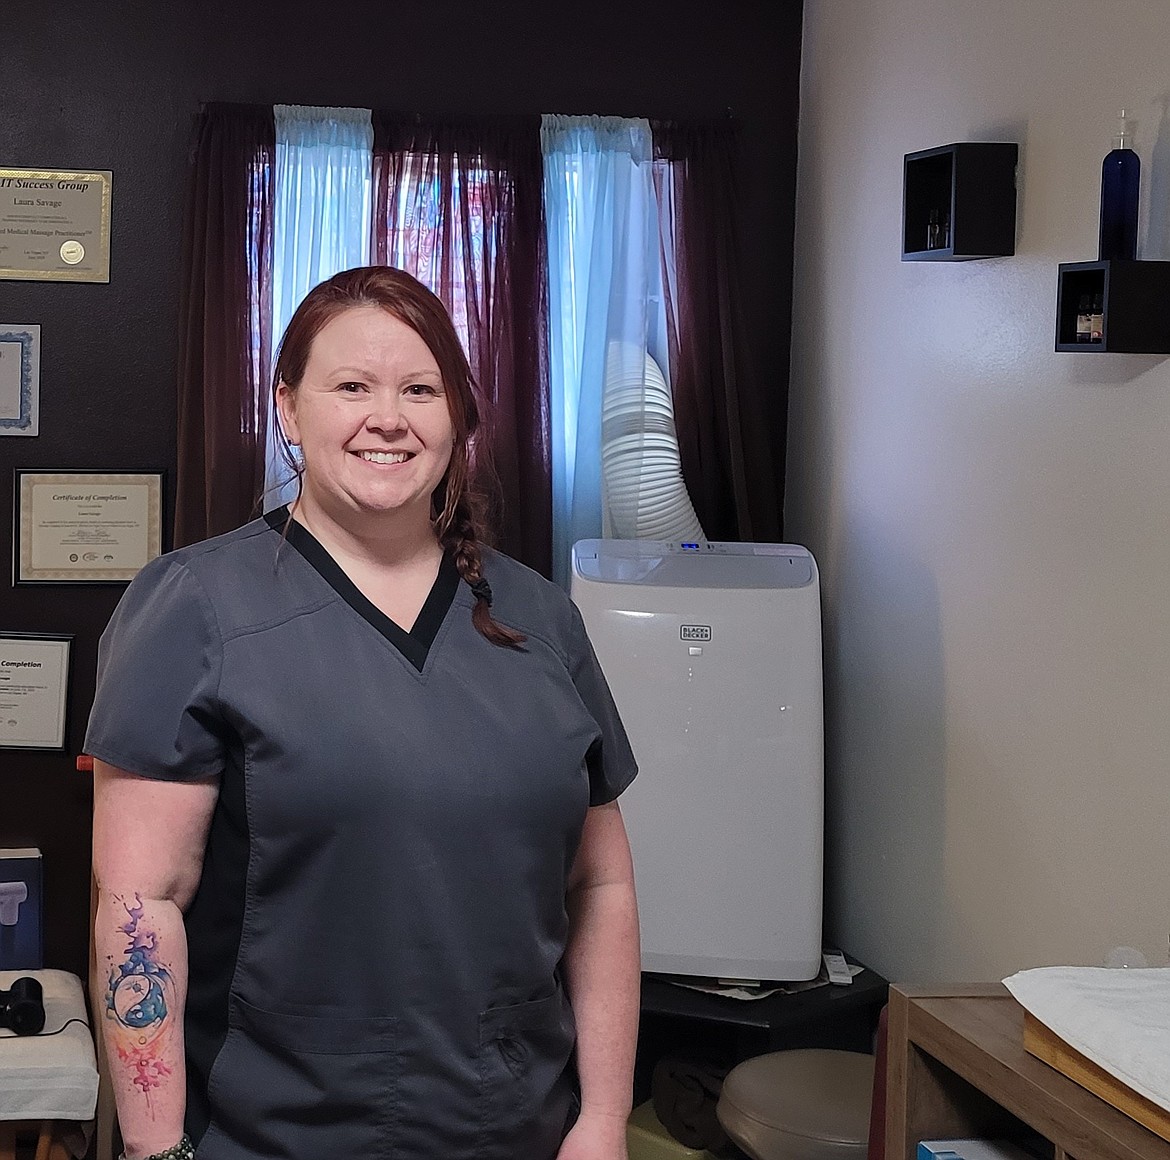 Laura Savage is a licensed massage therapist that offers a variety of massage services to help clients manage pain and take care of themselves in a way that leads to a happier life with reduced pain and stress.